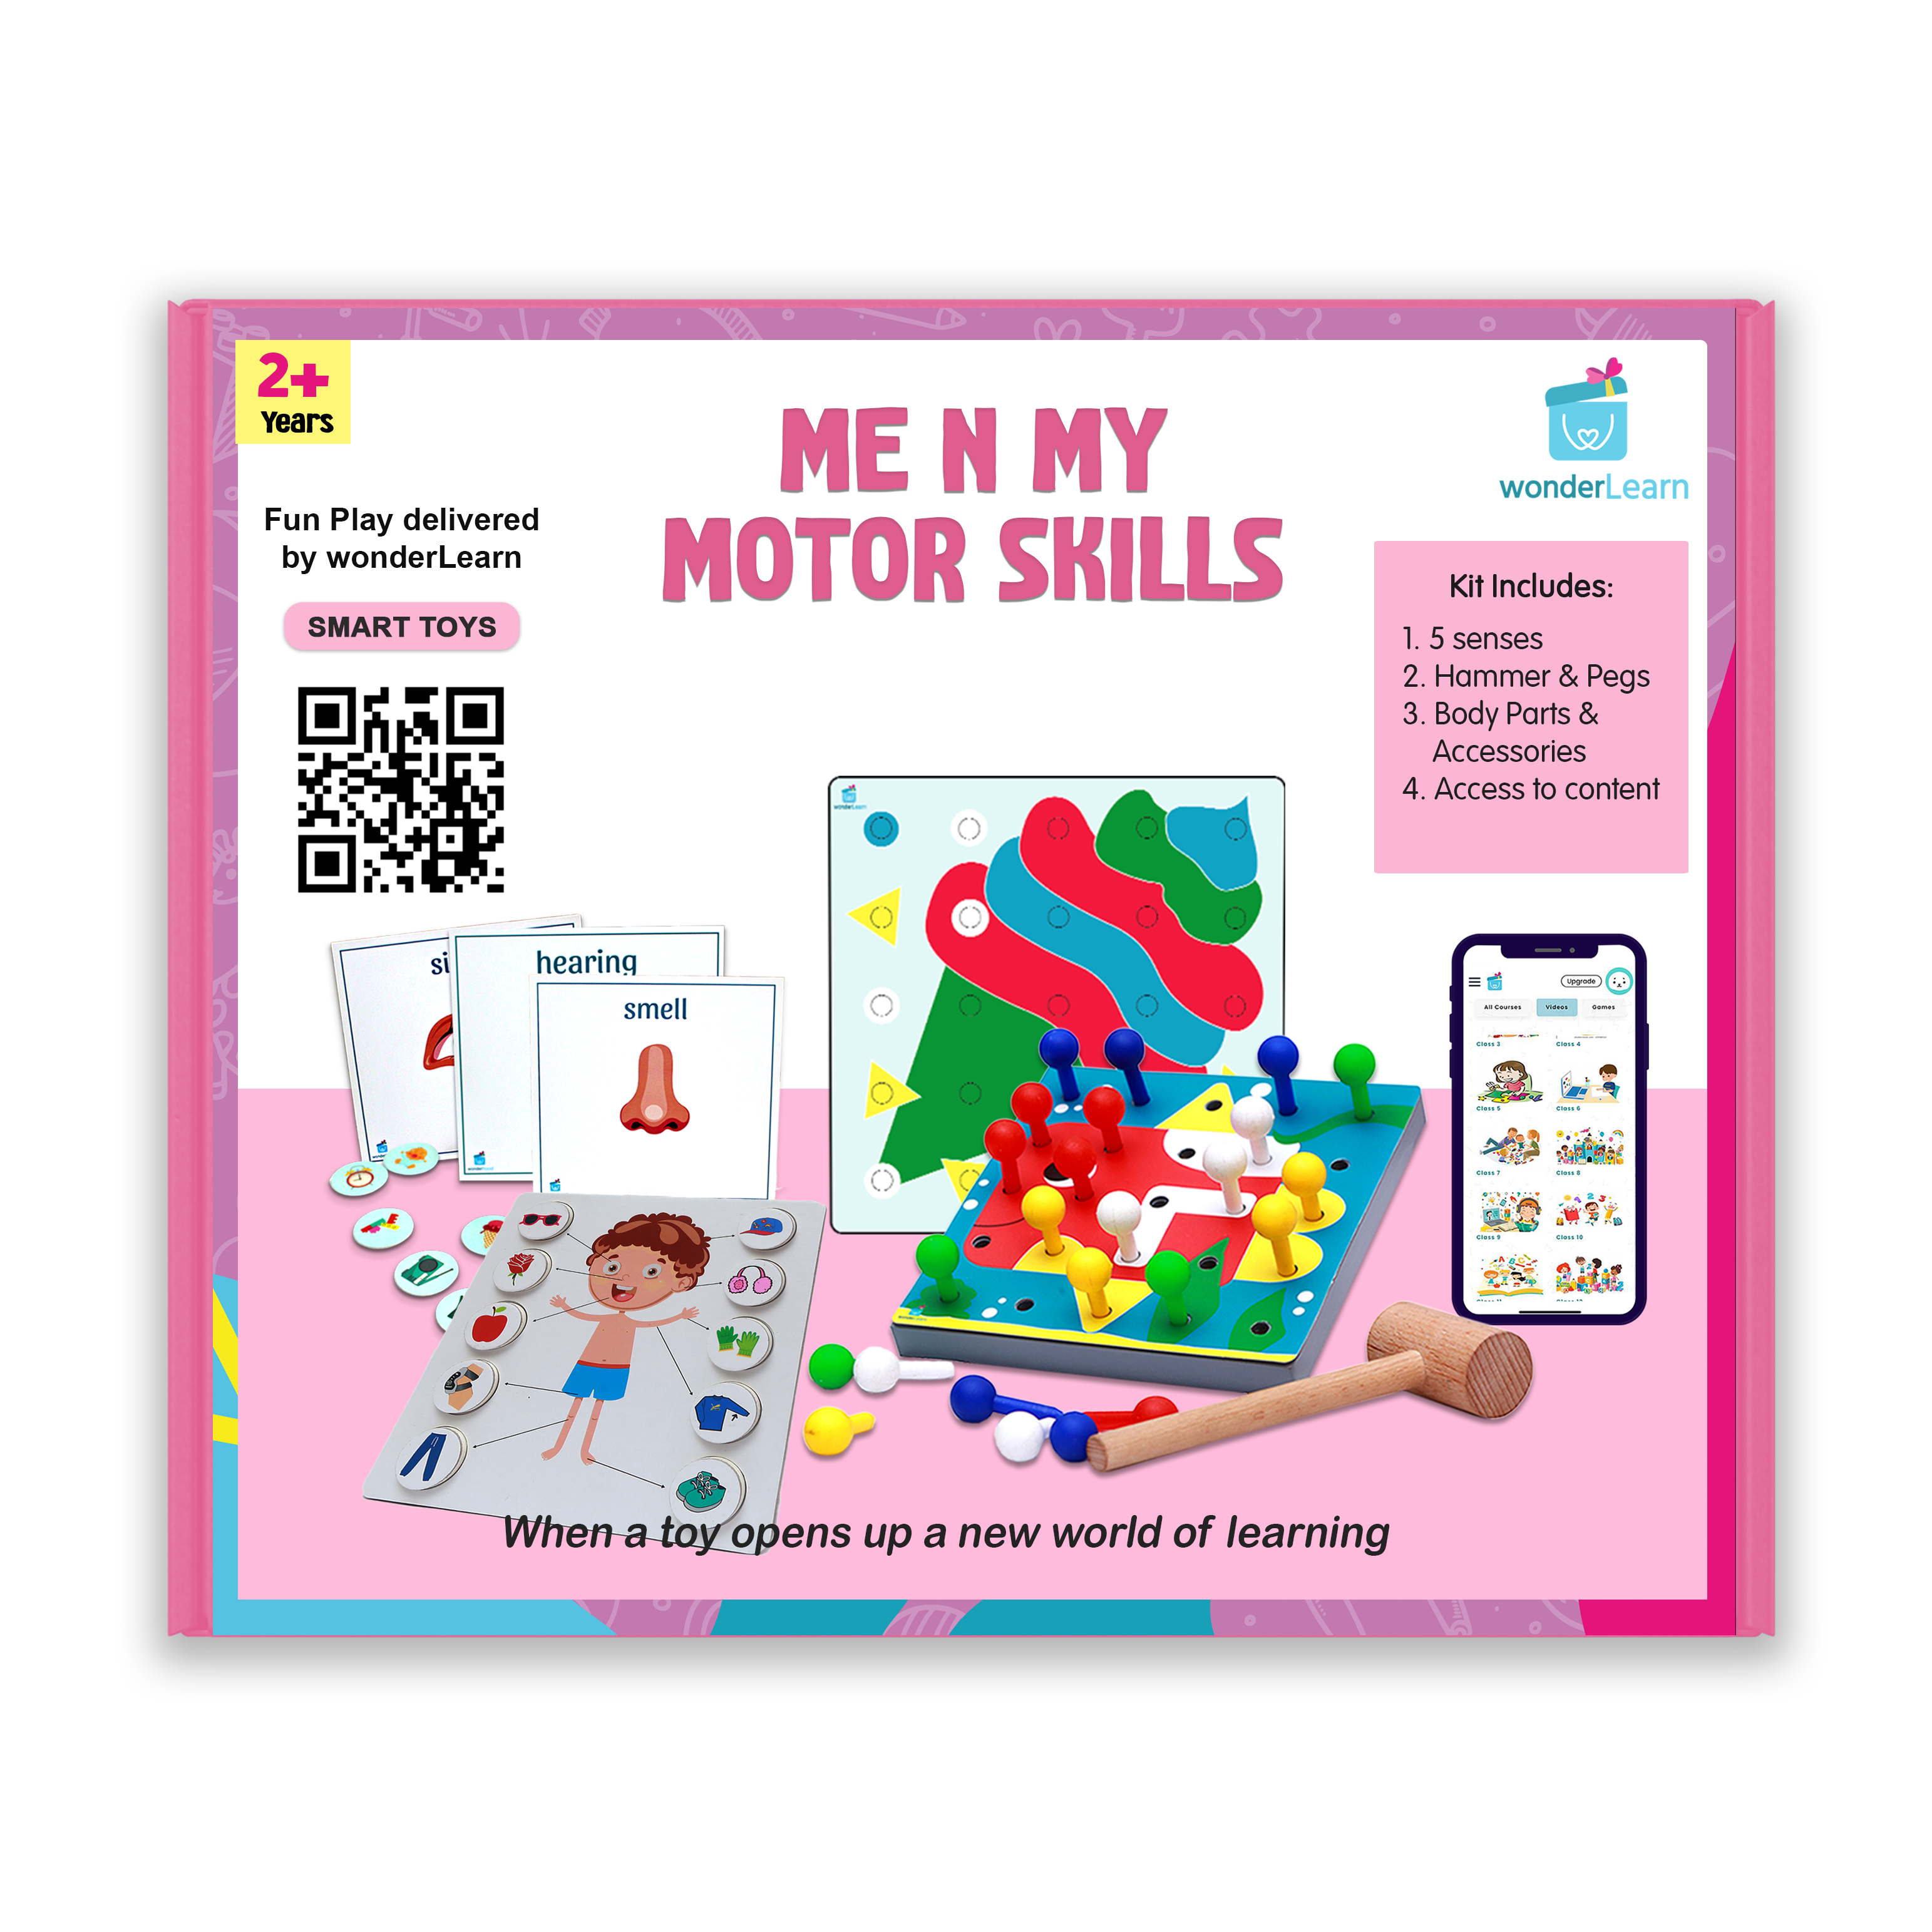 Fine Motor Skills Task Boxes - My Happy Place Teaching